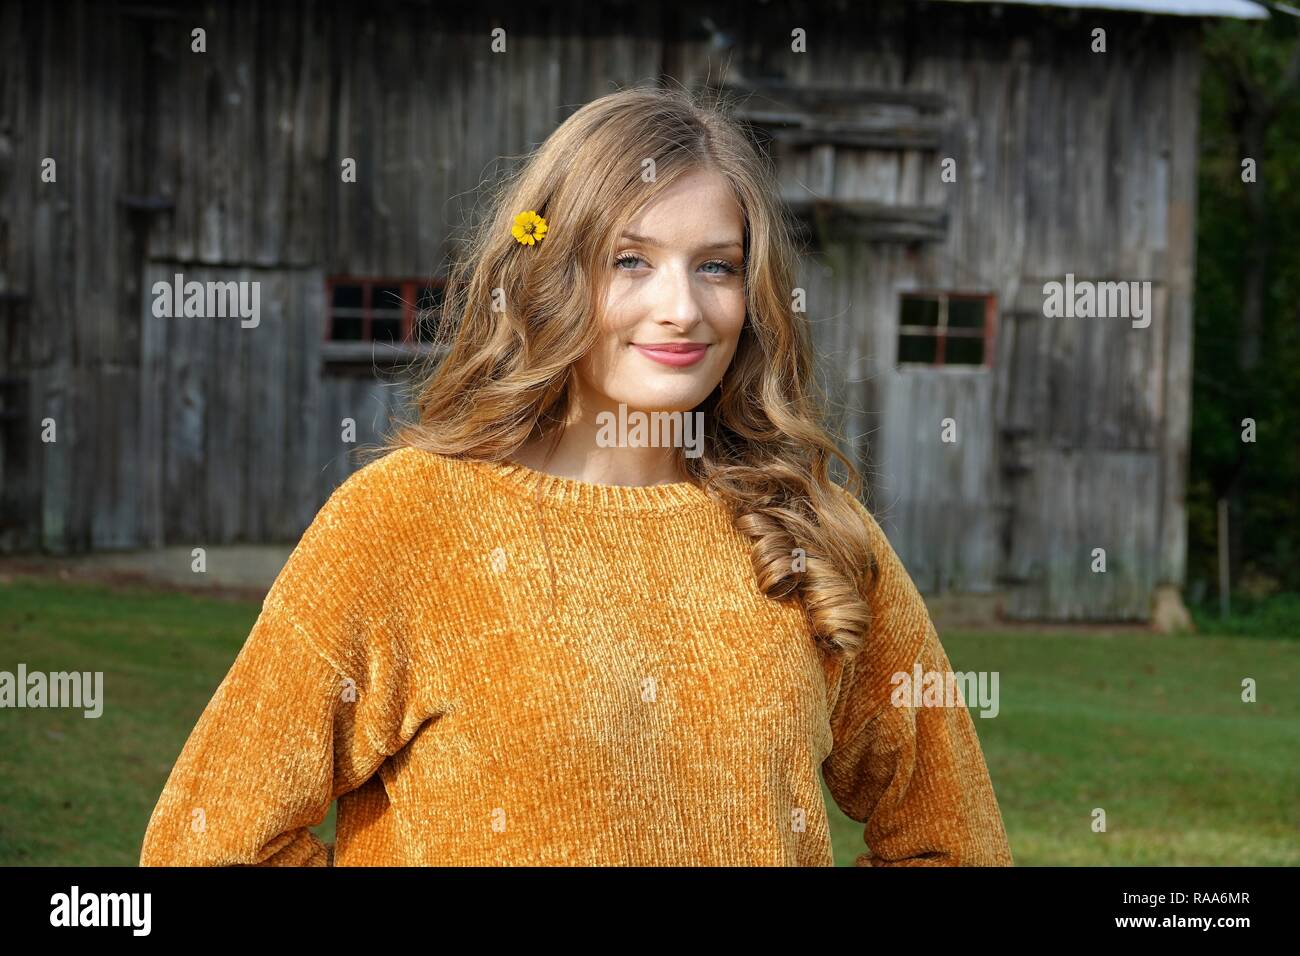 A beautiful natural country girl Stock Photo